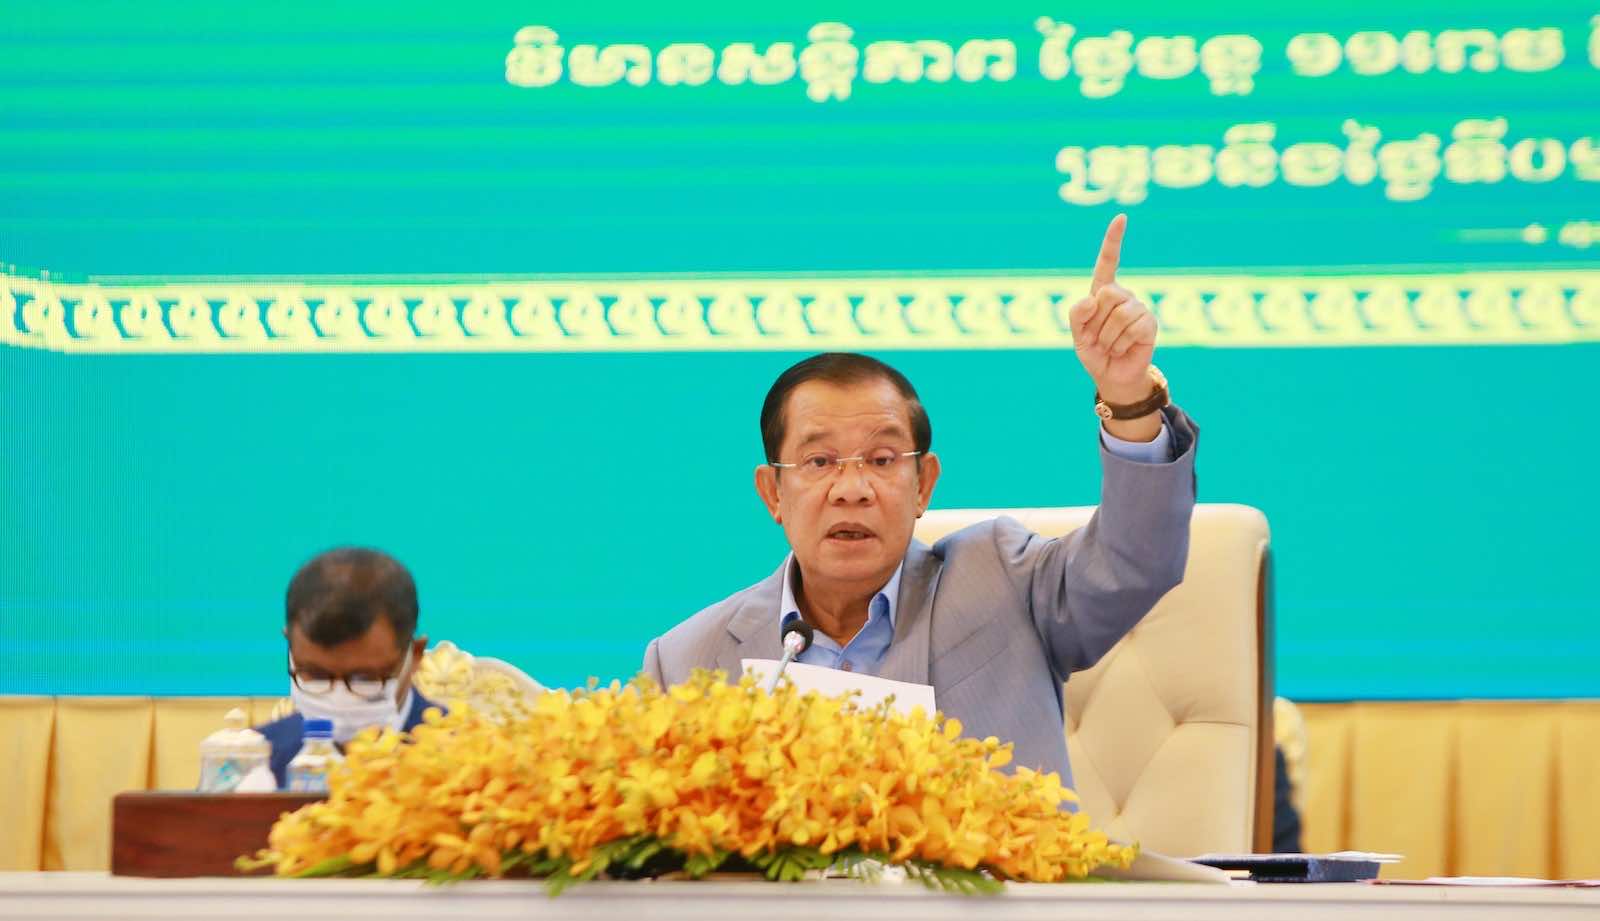 Cambodian Prime Minister Hun Sen has said he has no intention of handing over power until at least 2028 (Sovannara/Xinhua via Getty Images)